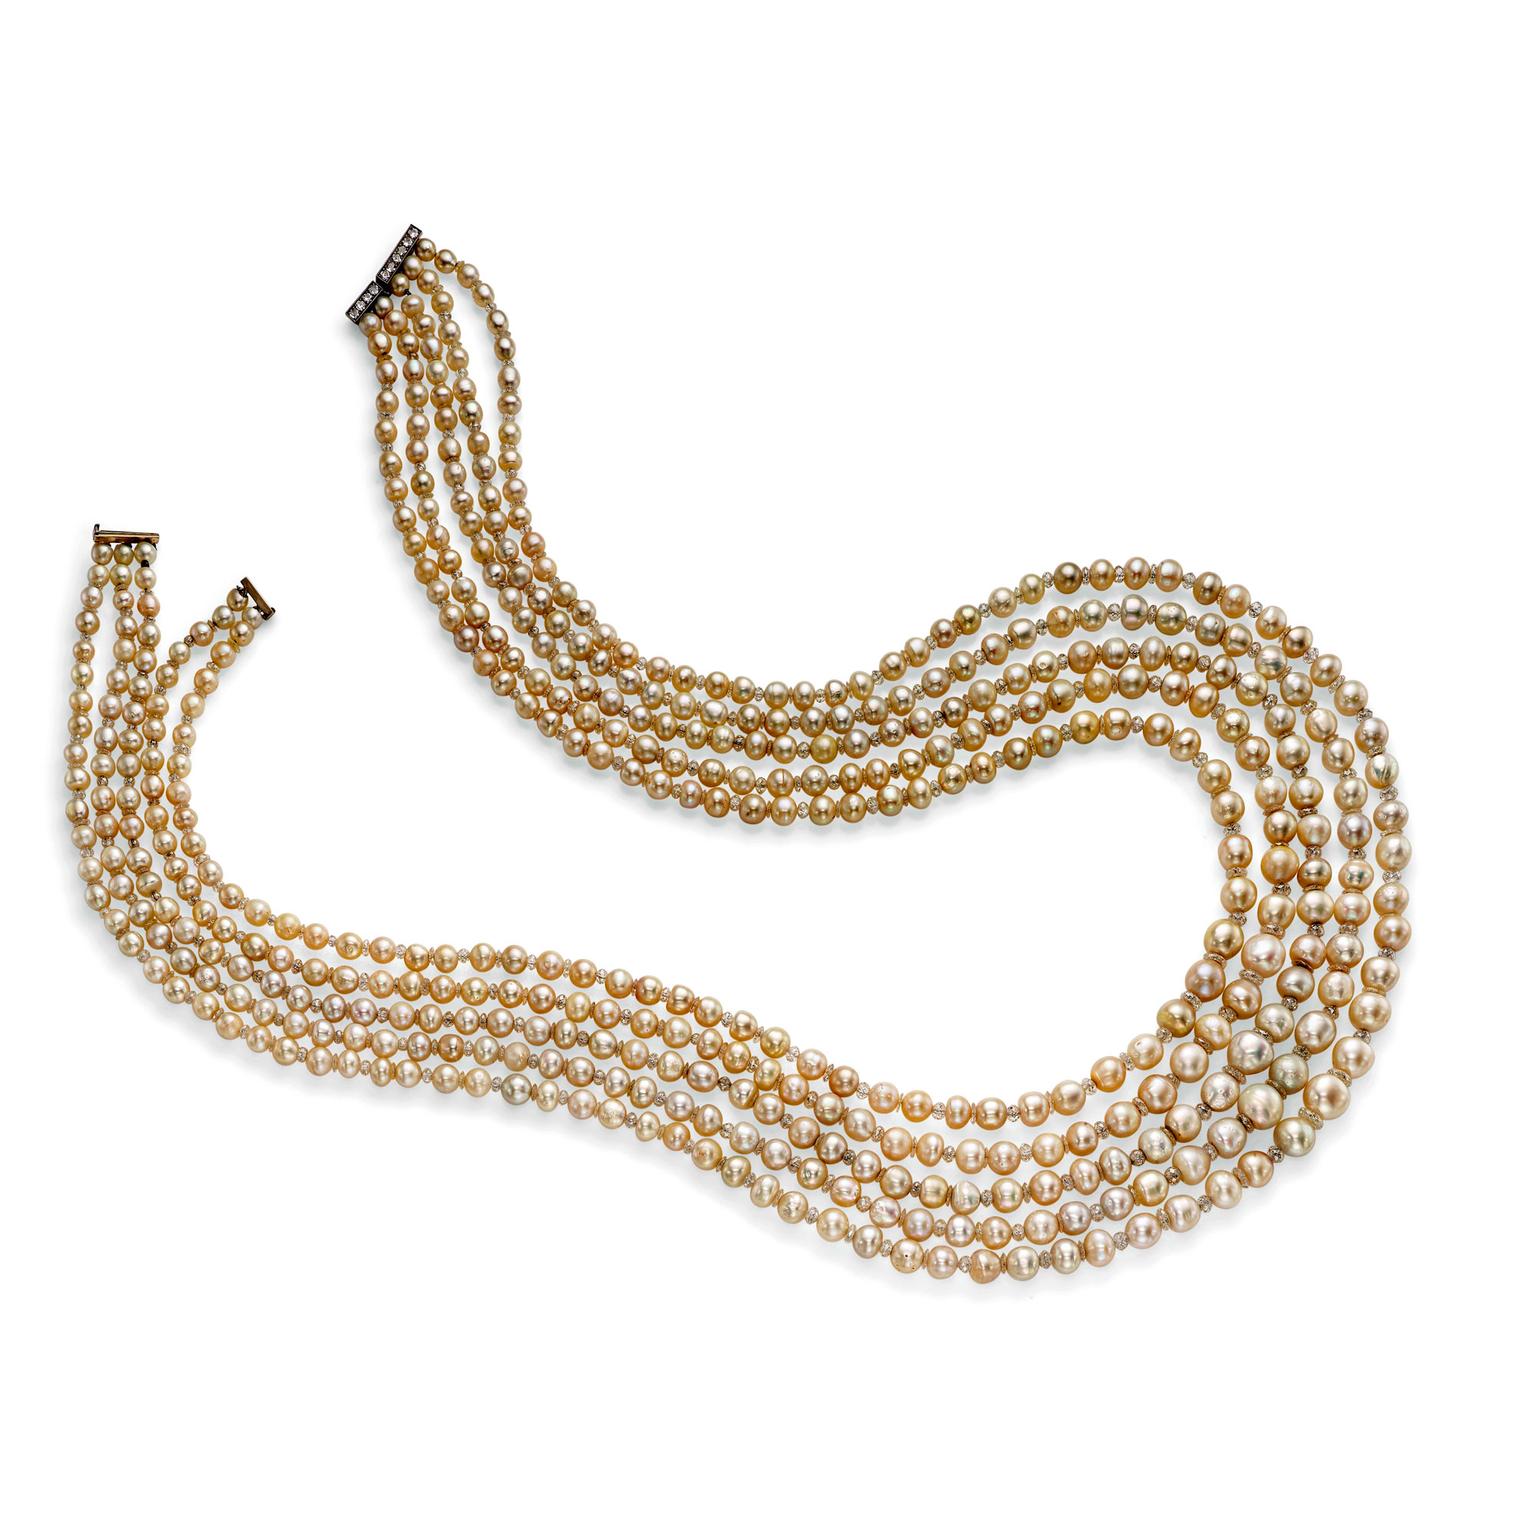 A five-strand natural pearl and diamond necklace